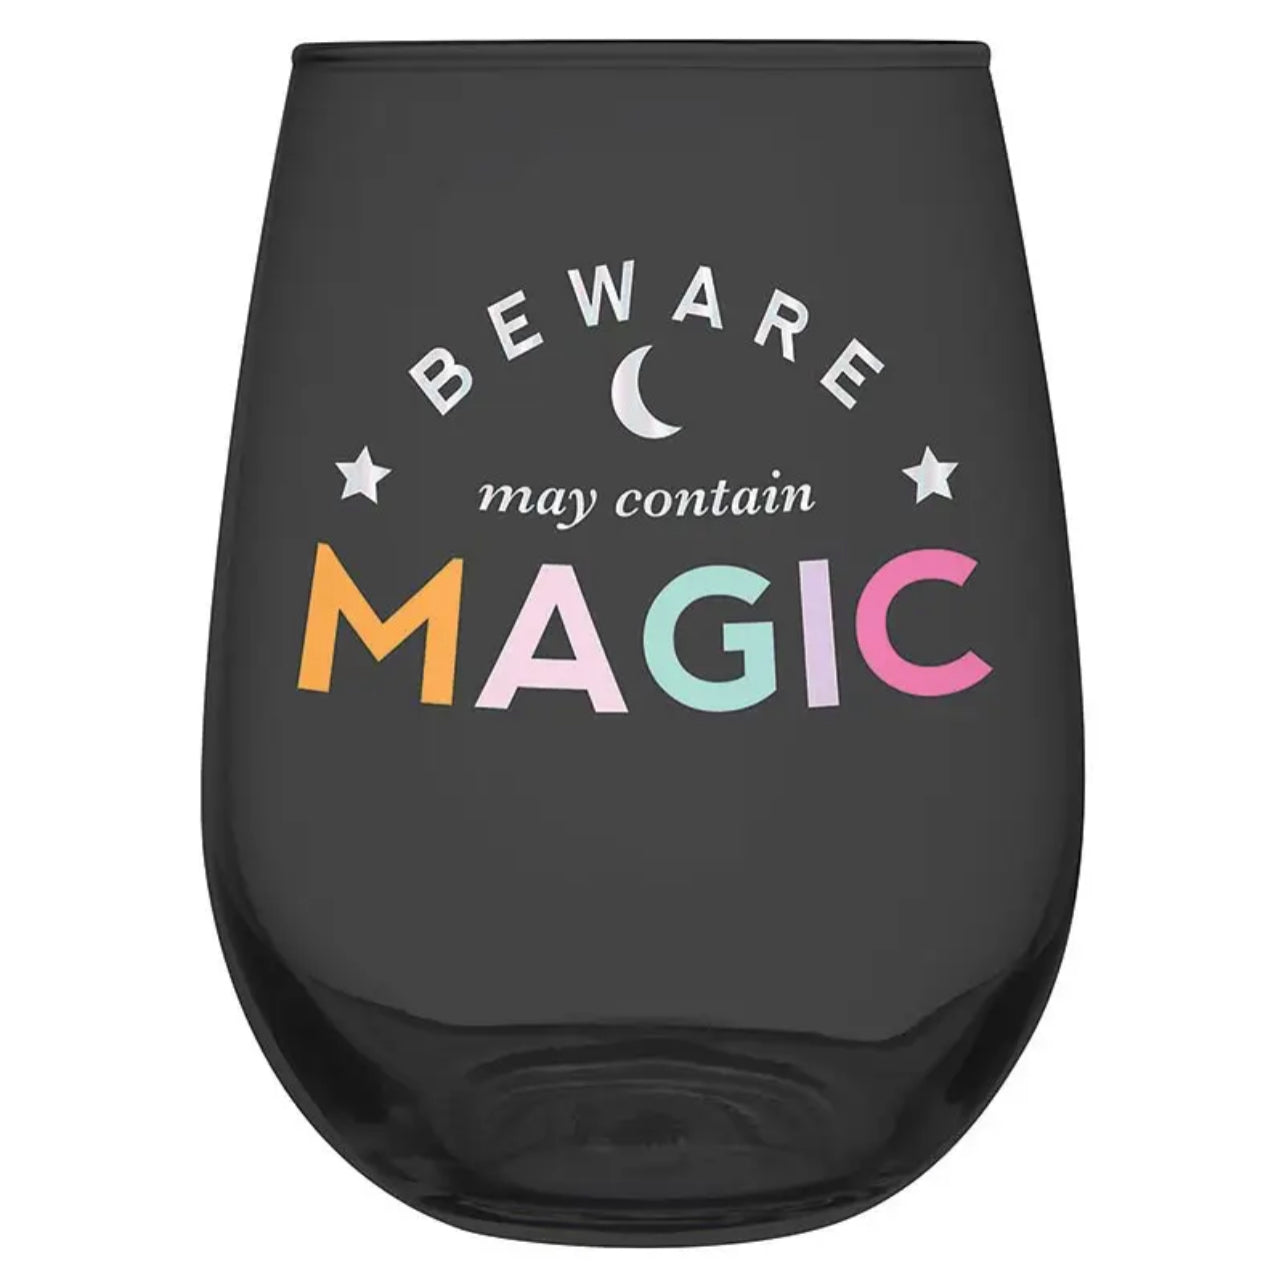 black stemless wine glass featuring a moon and stars and writing that says "beware may contain magic"